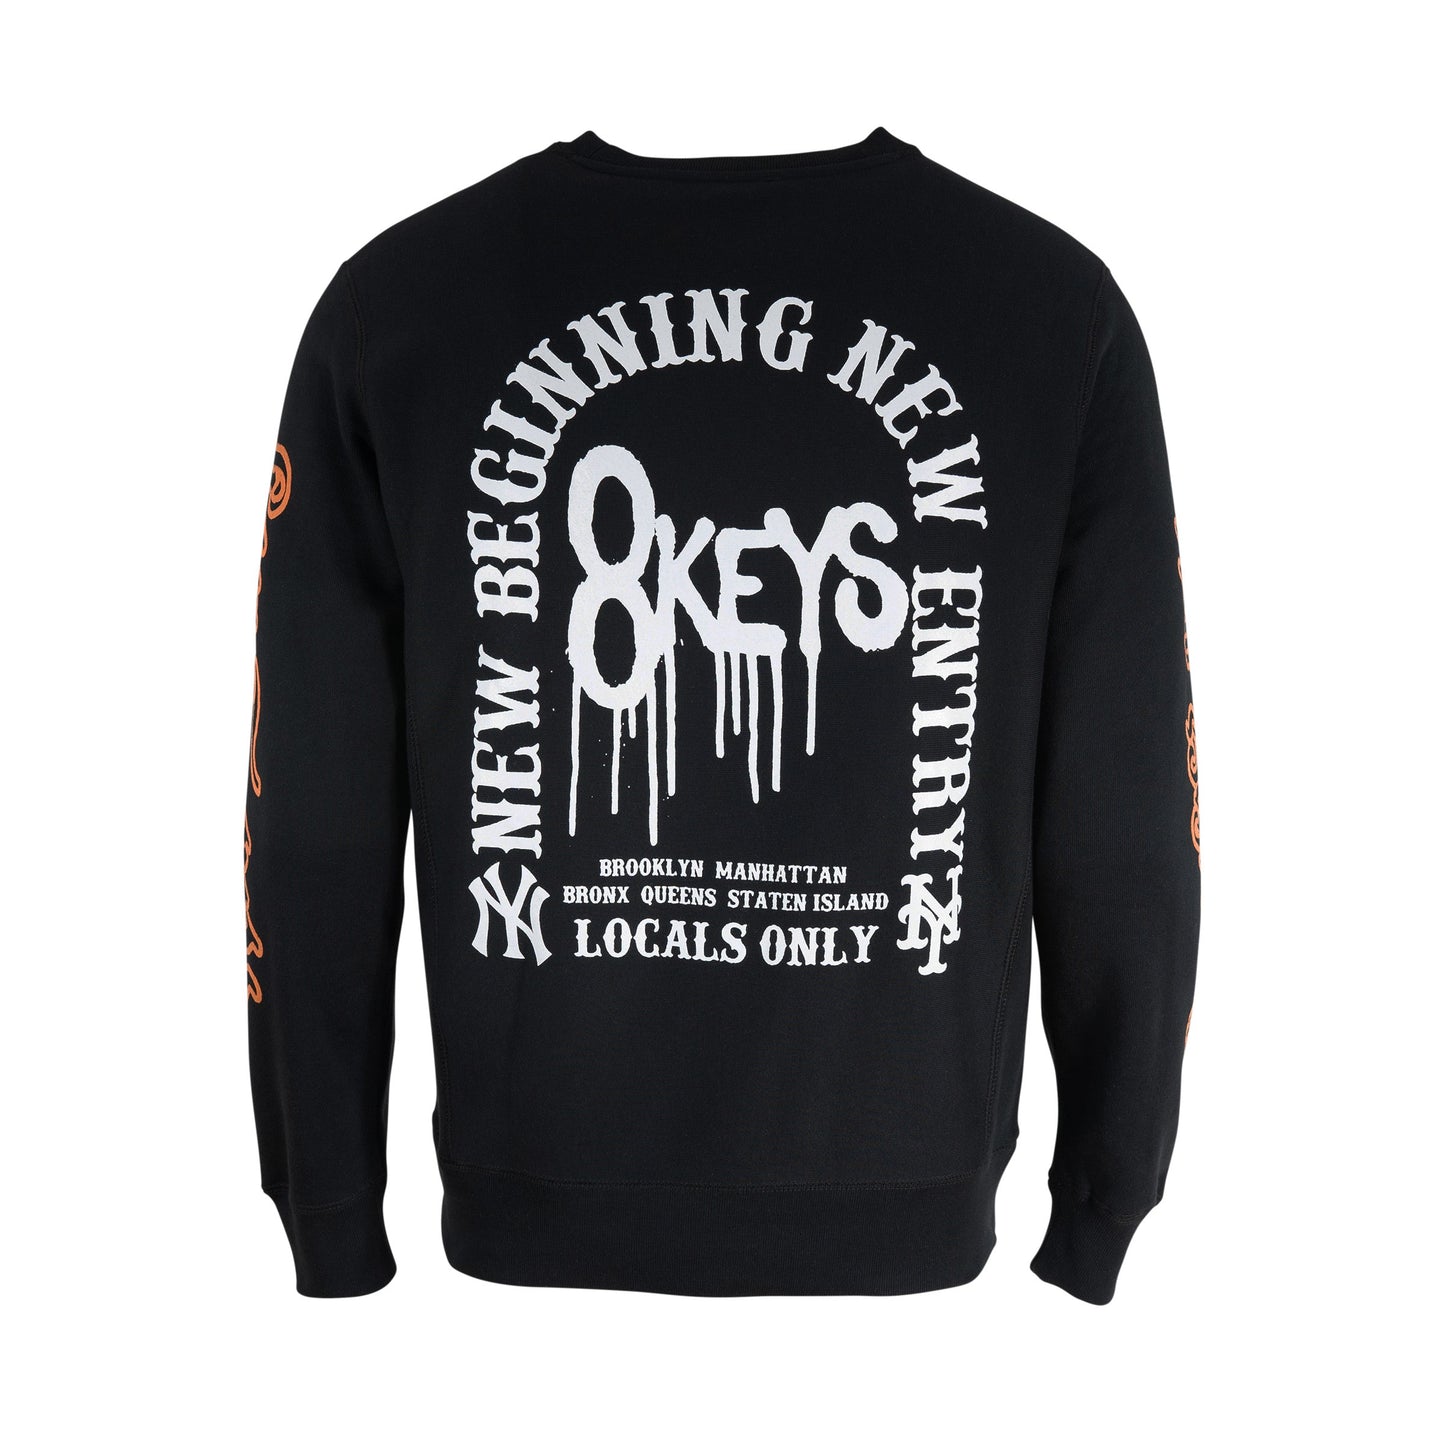 Black local only crewneck sweater